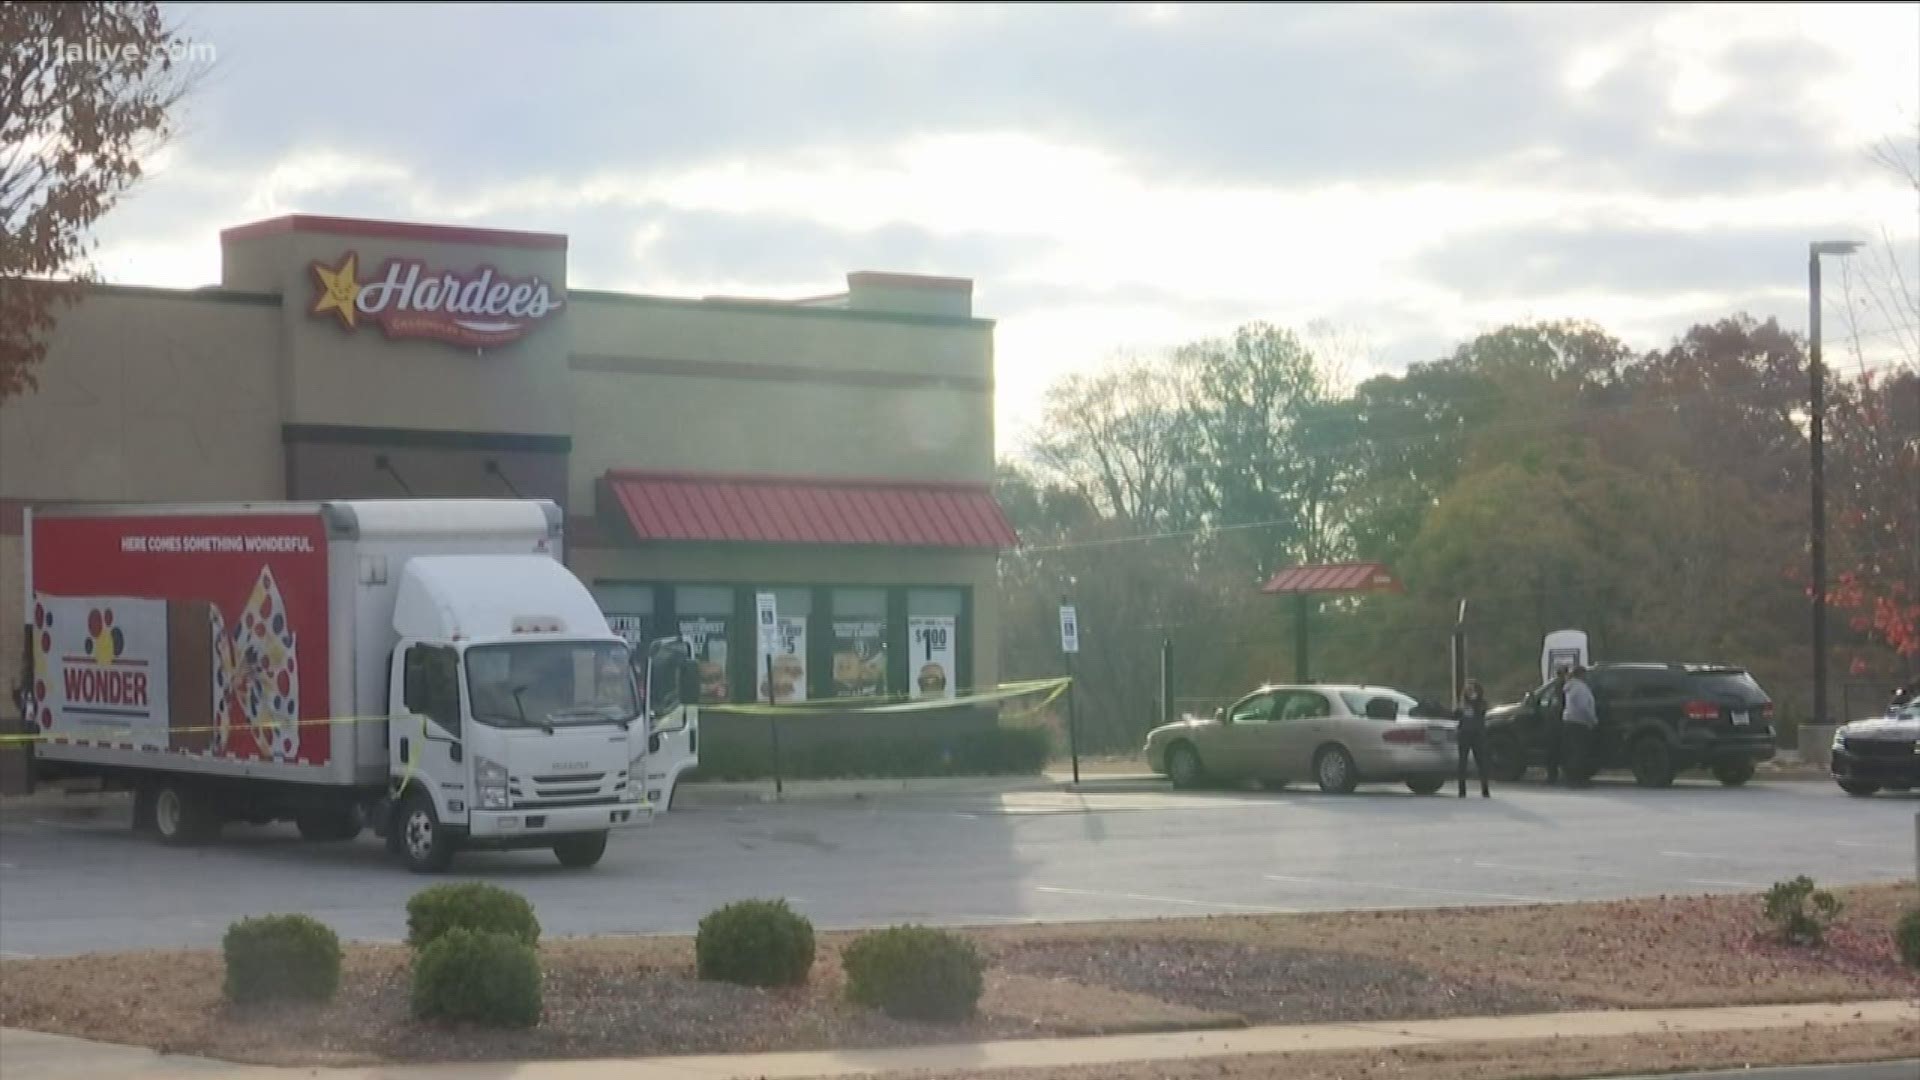 A bread truck driver who happened across the robbery retrieved a gun from his truck and shot the would-be robber, the sheriff said.